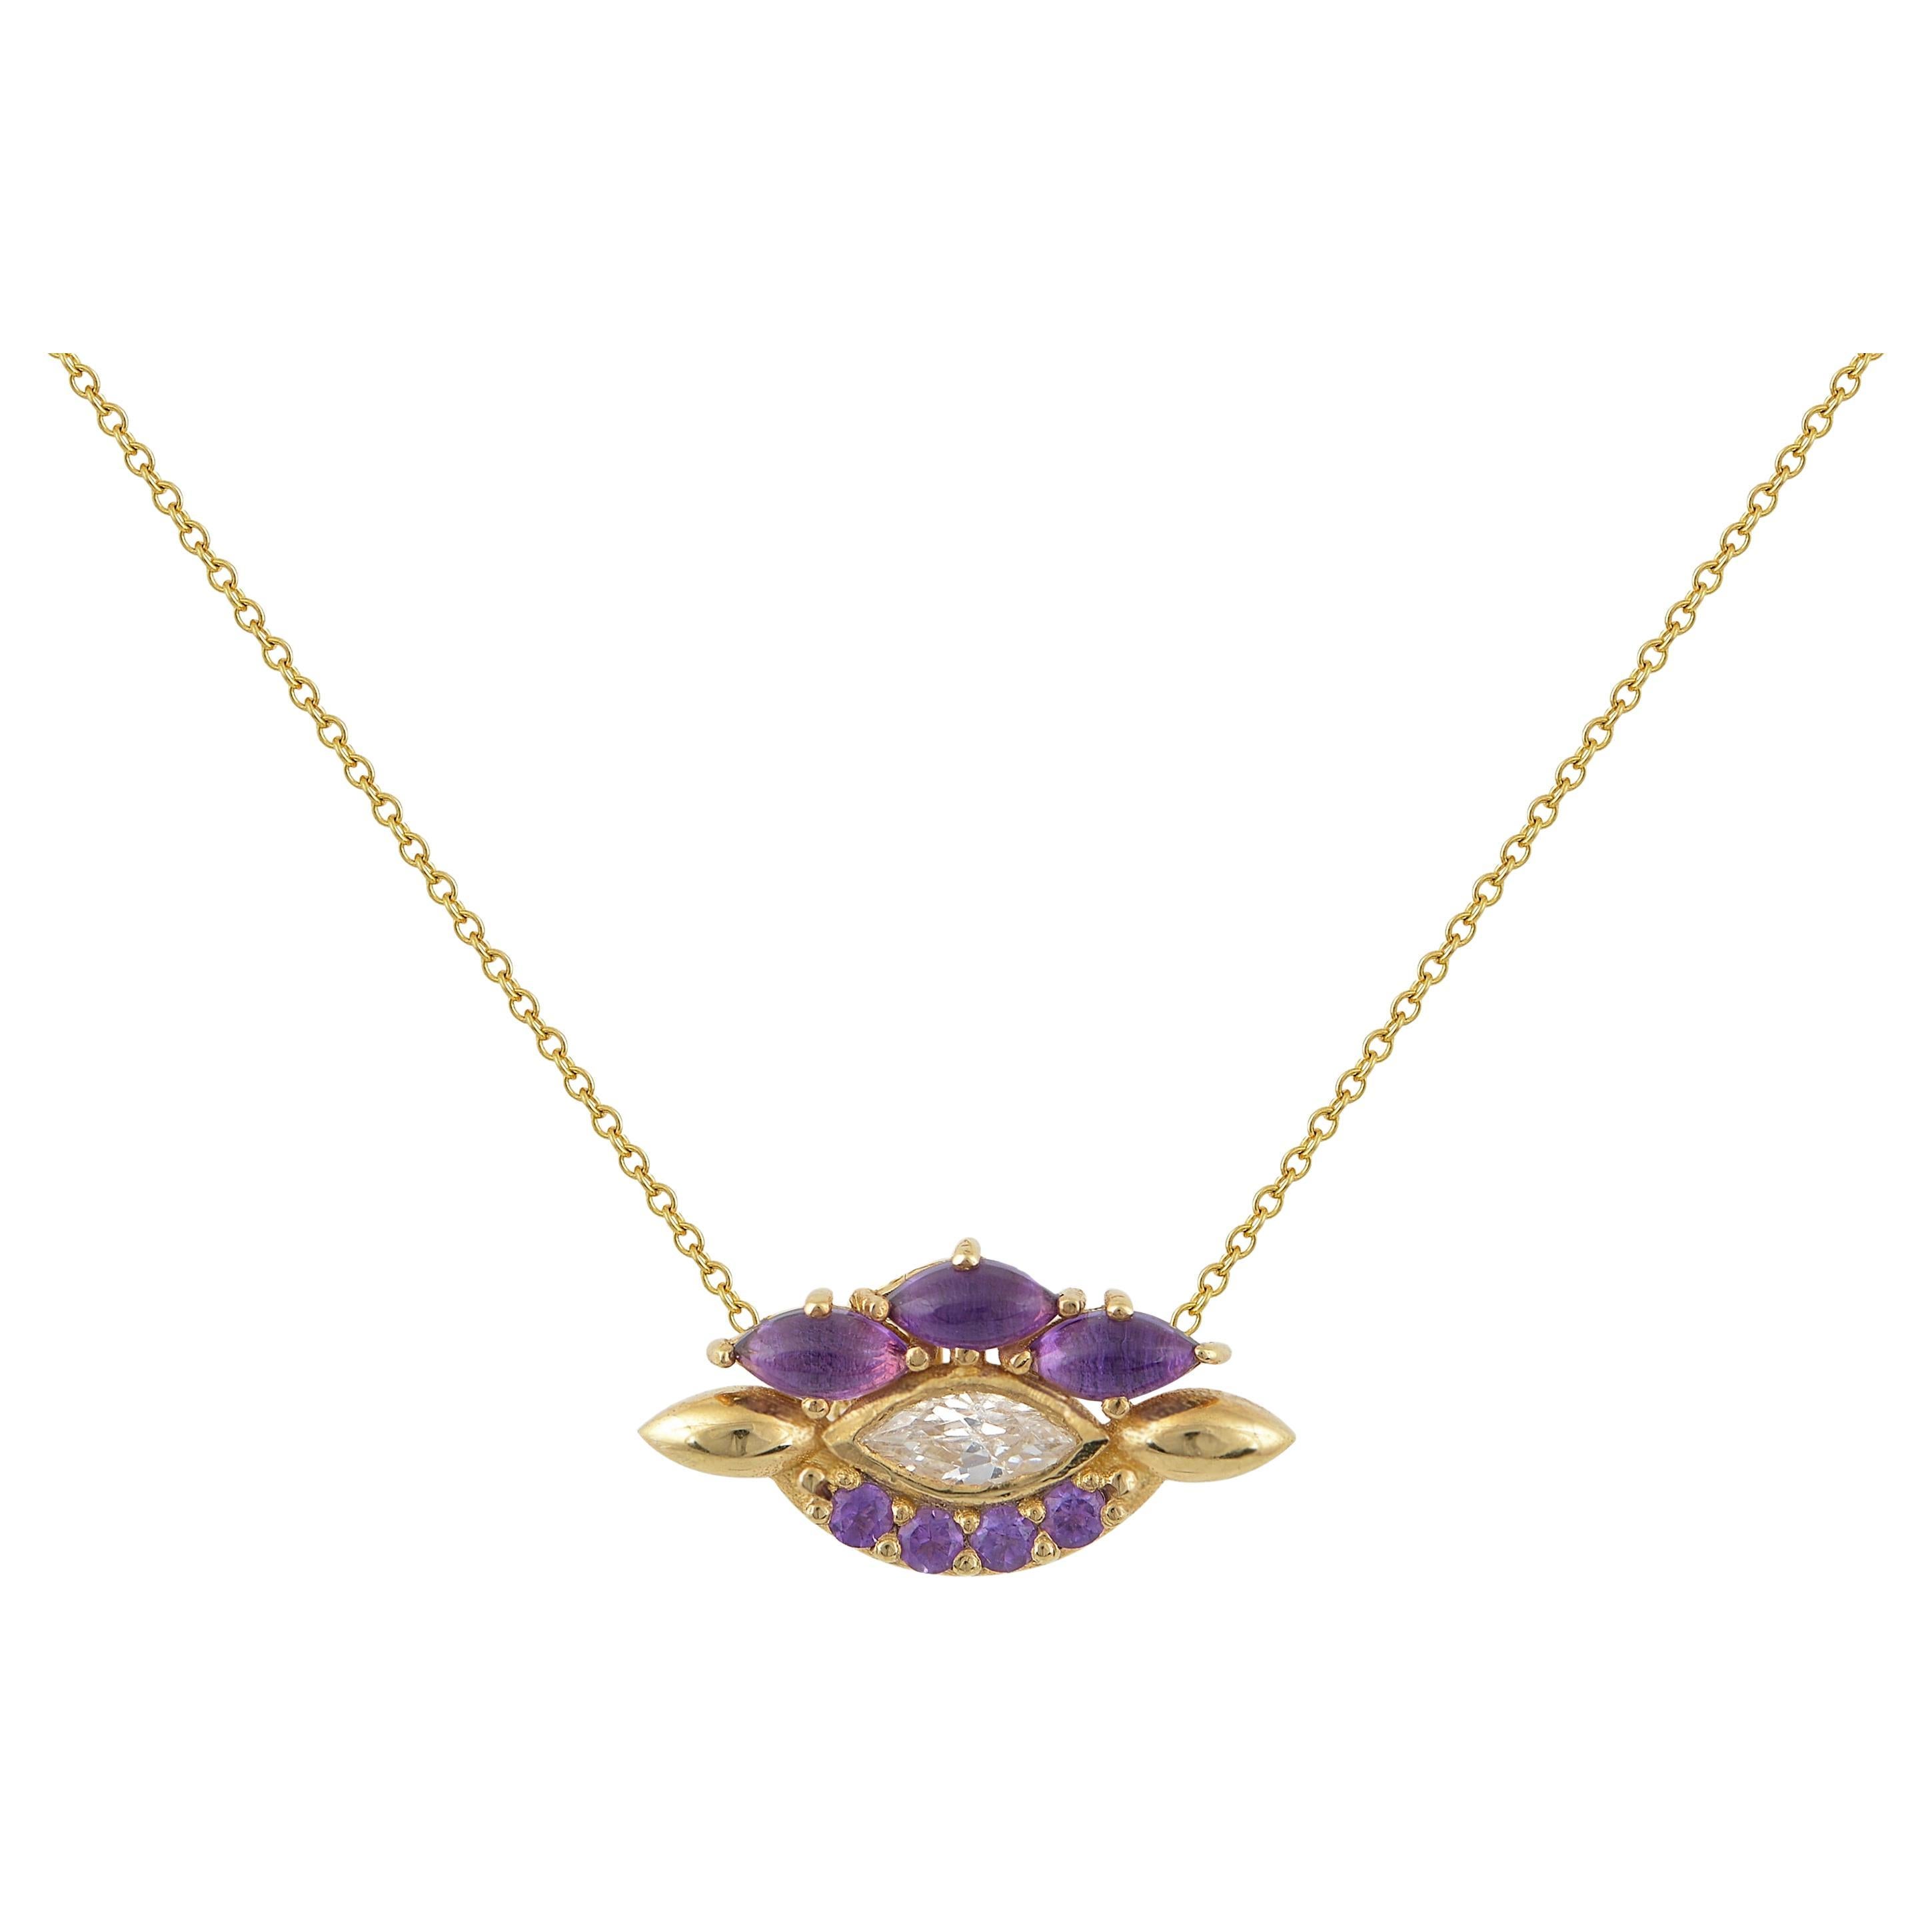 Eye Pendant in 18 Karat Yellow Gold With A Pear Shaped Diamond And Amethysts For Sale